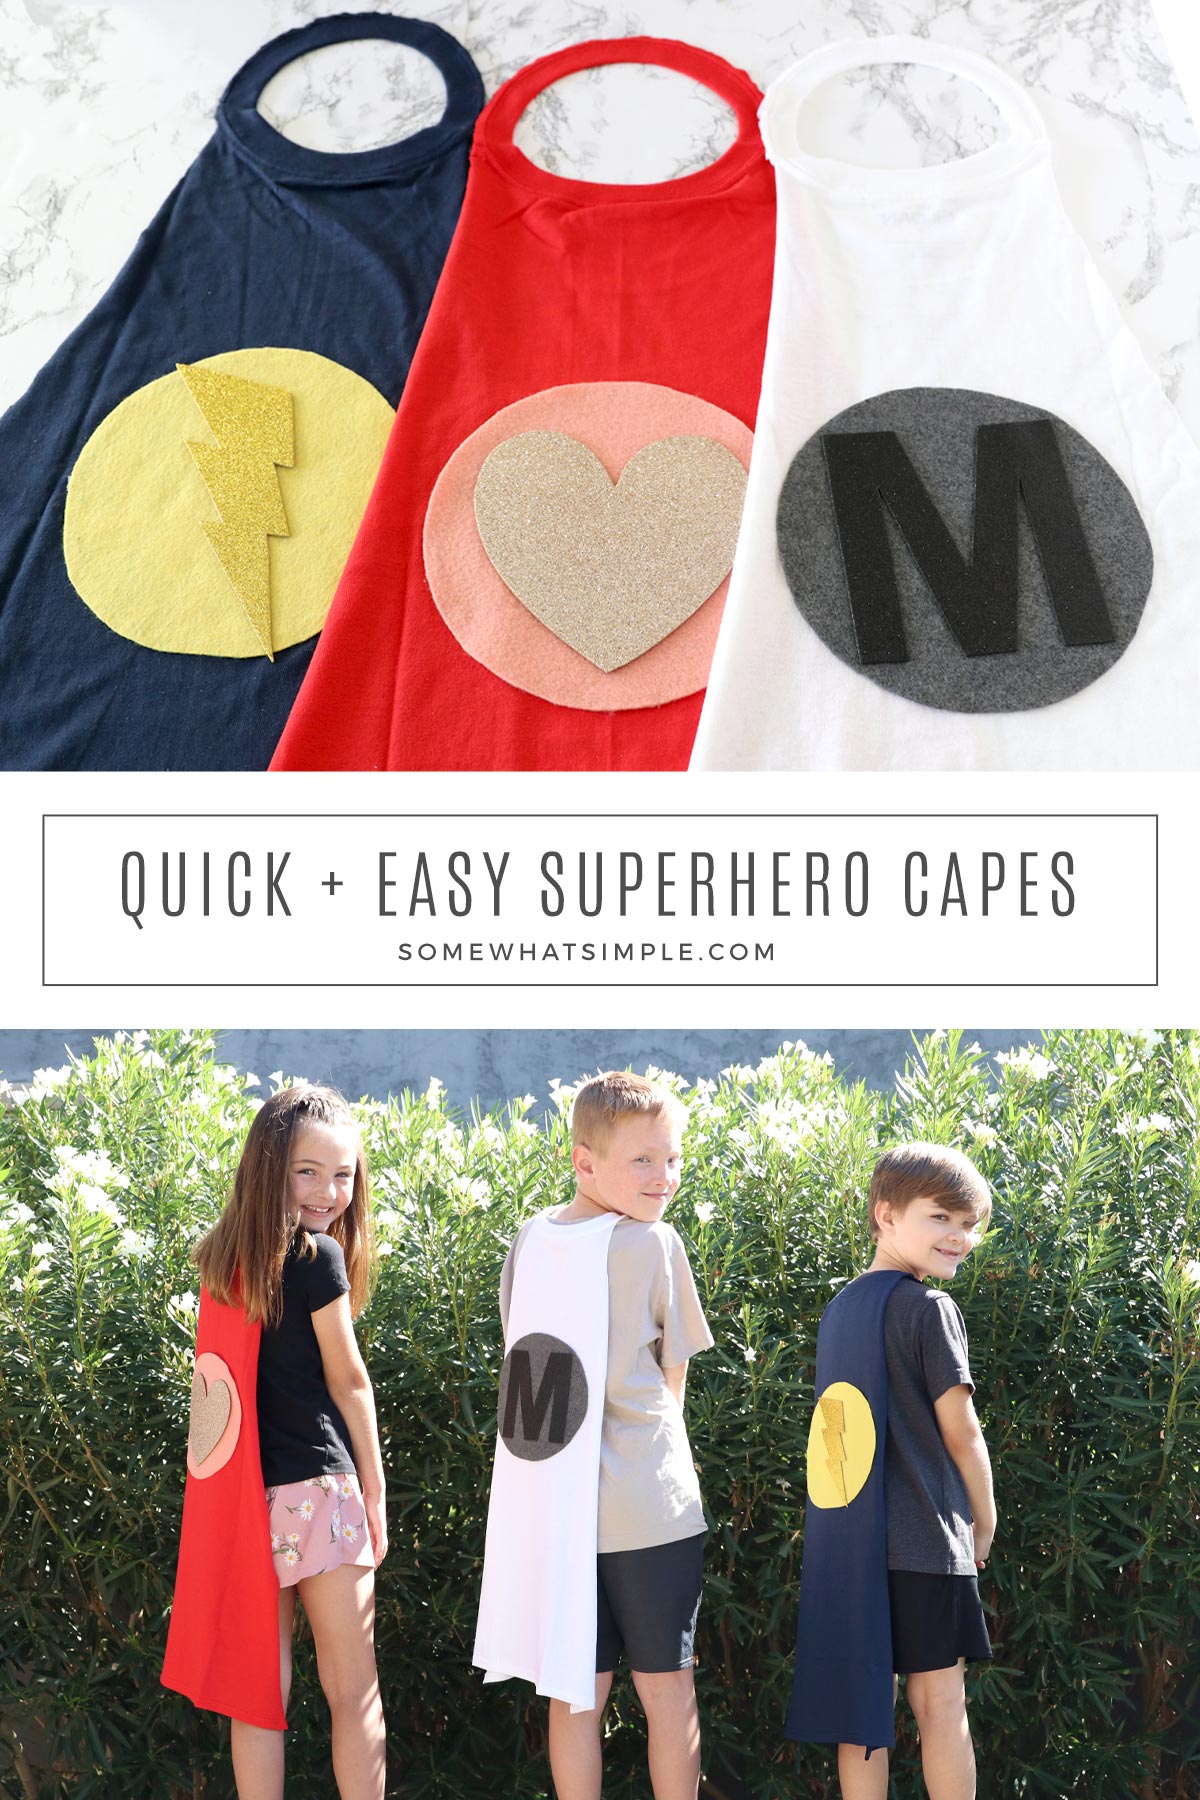 You don't need lots of fancy supplies or sewing skills to make fun superhero capes for kids. These easy capes can be made with an old T-shirt, a hot glue gun, and about 10 minutes of your time! via @somewhatsimple